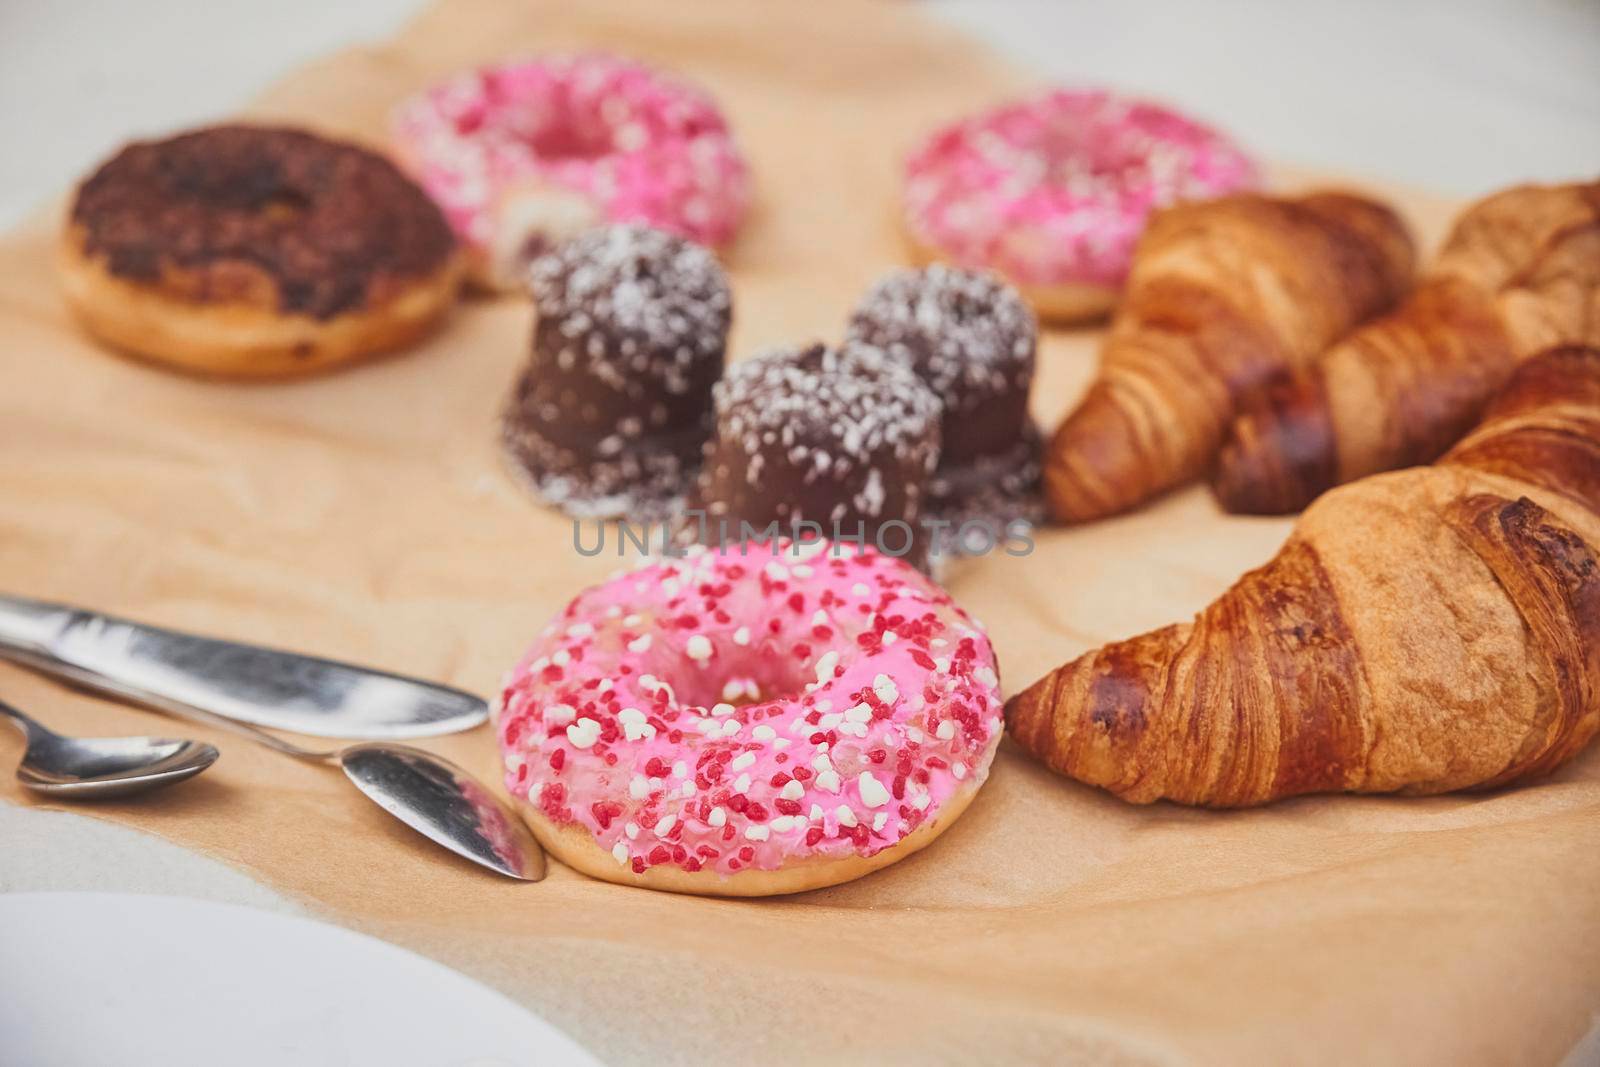 Donuts, croissants and sweets on craft paper by Viktor_Osypenko